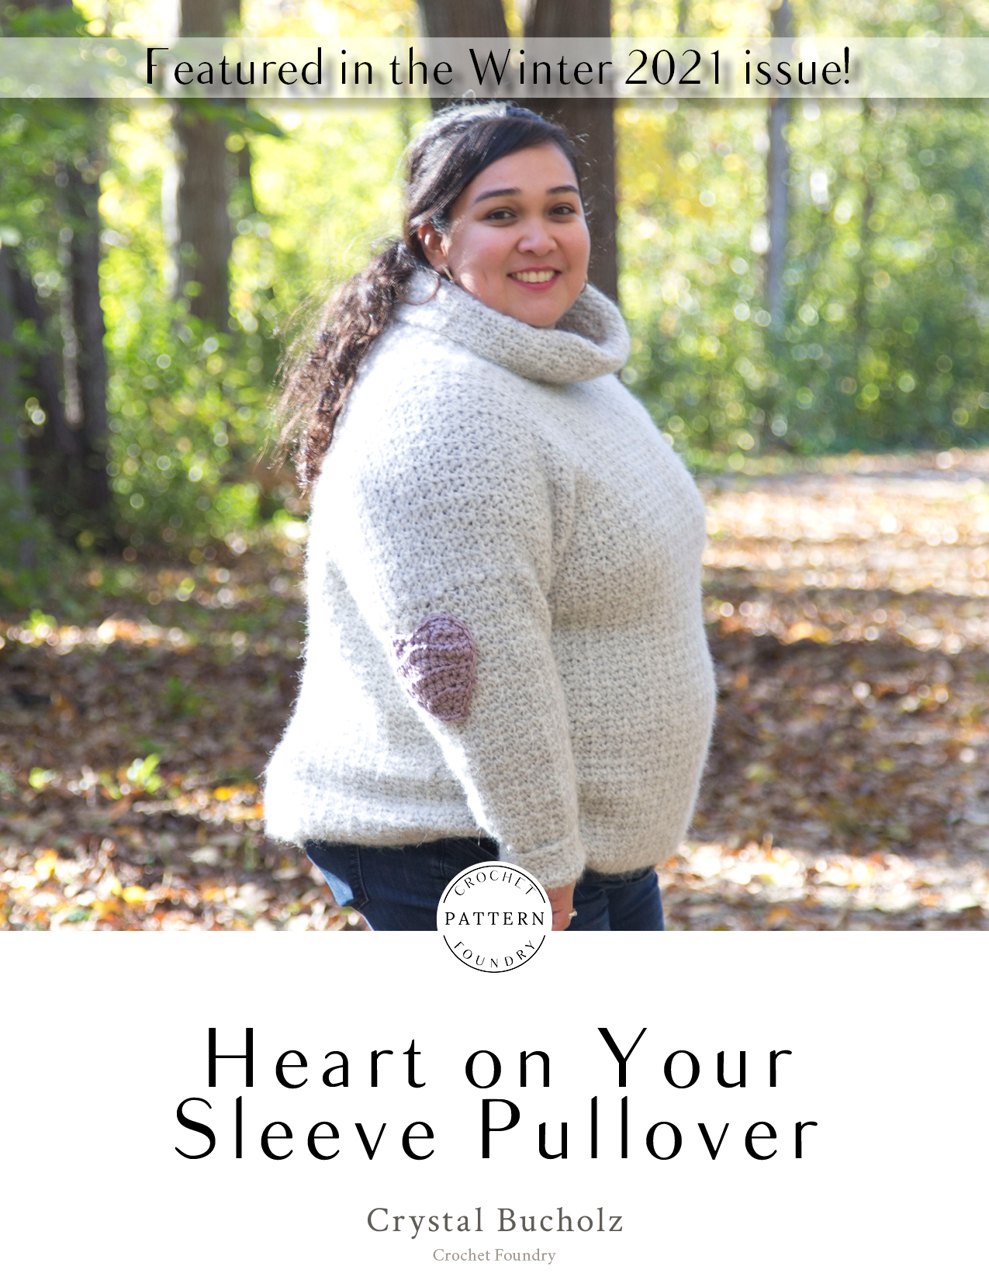 Heart on Your Sleeve Pullover Crochet PDF Pattern by Crystal Bucholz